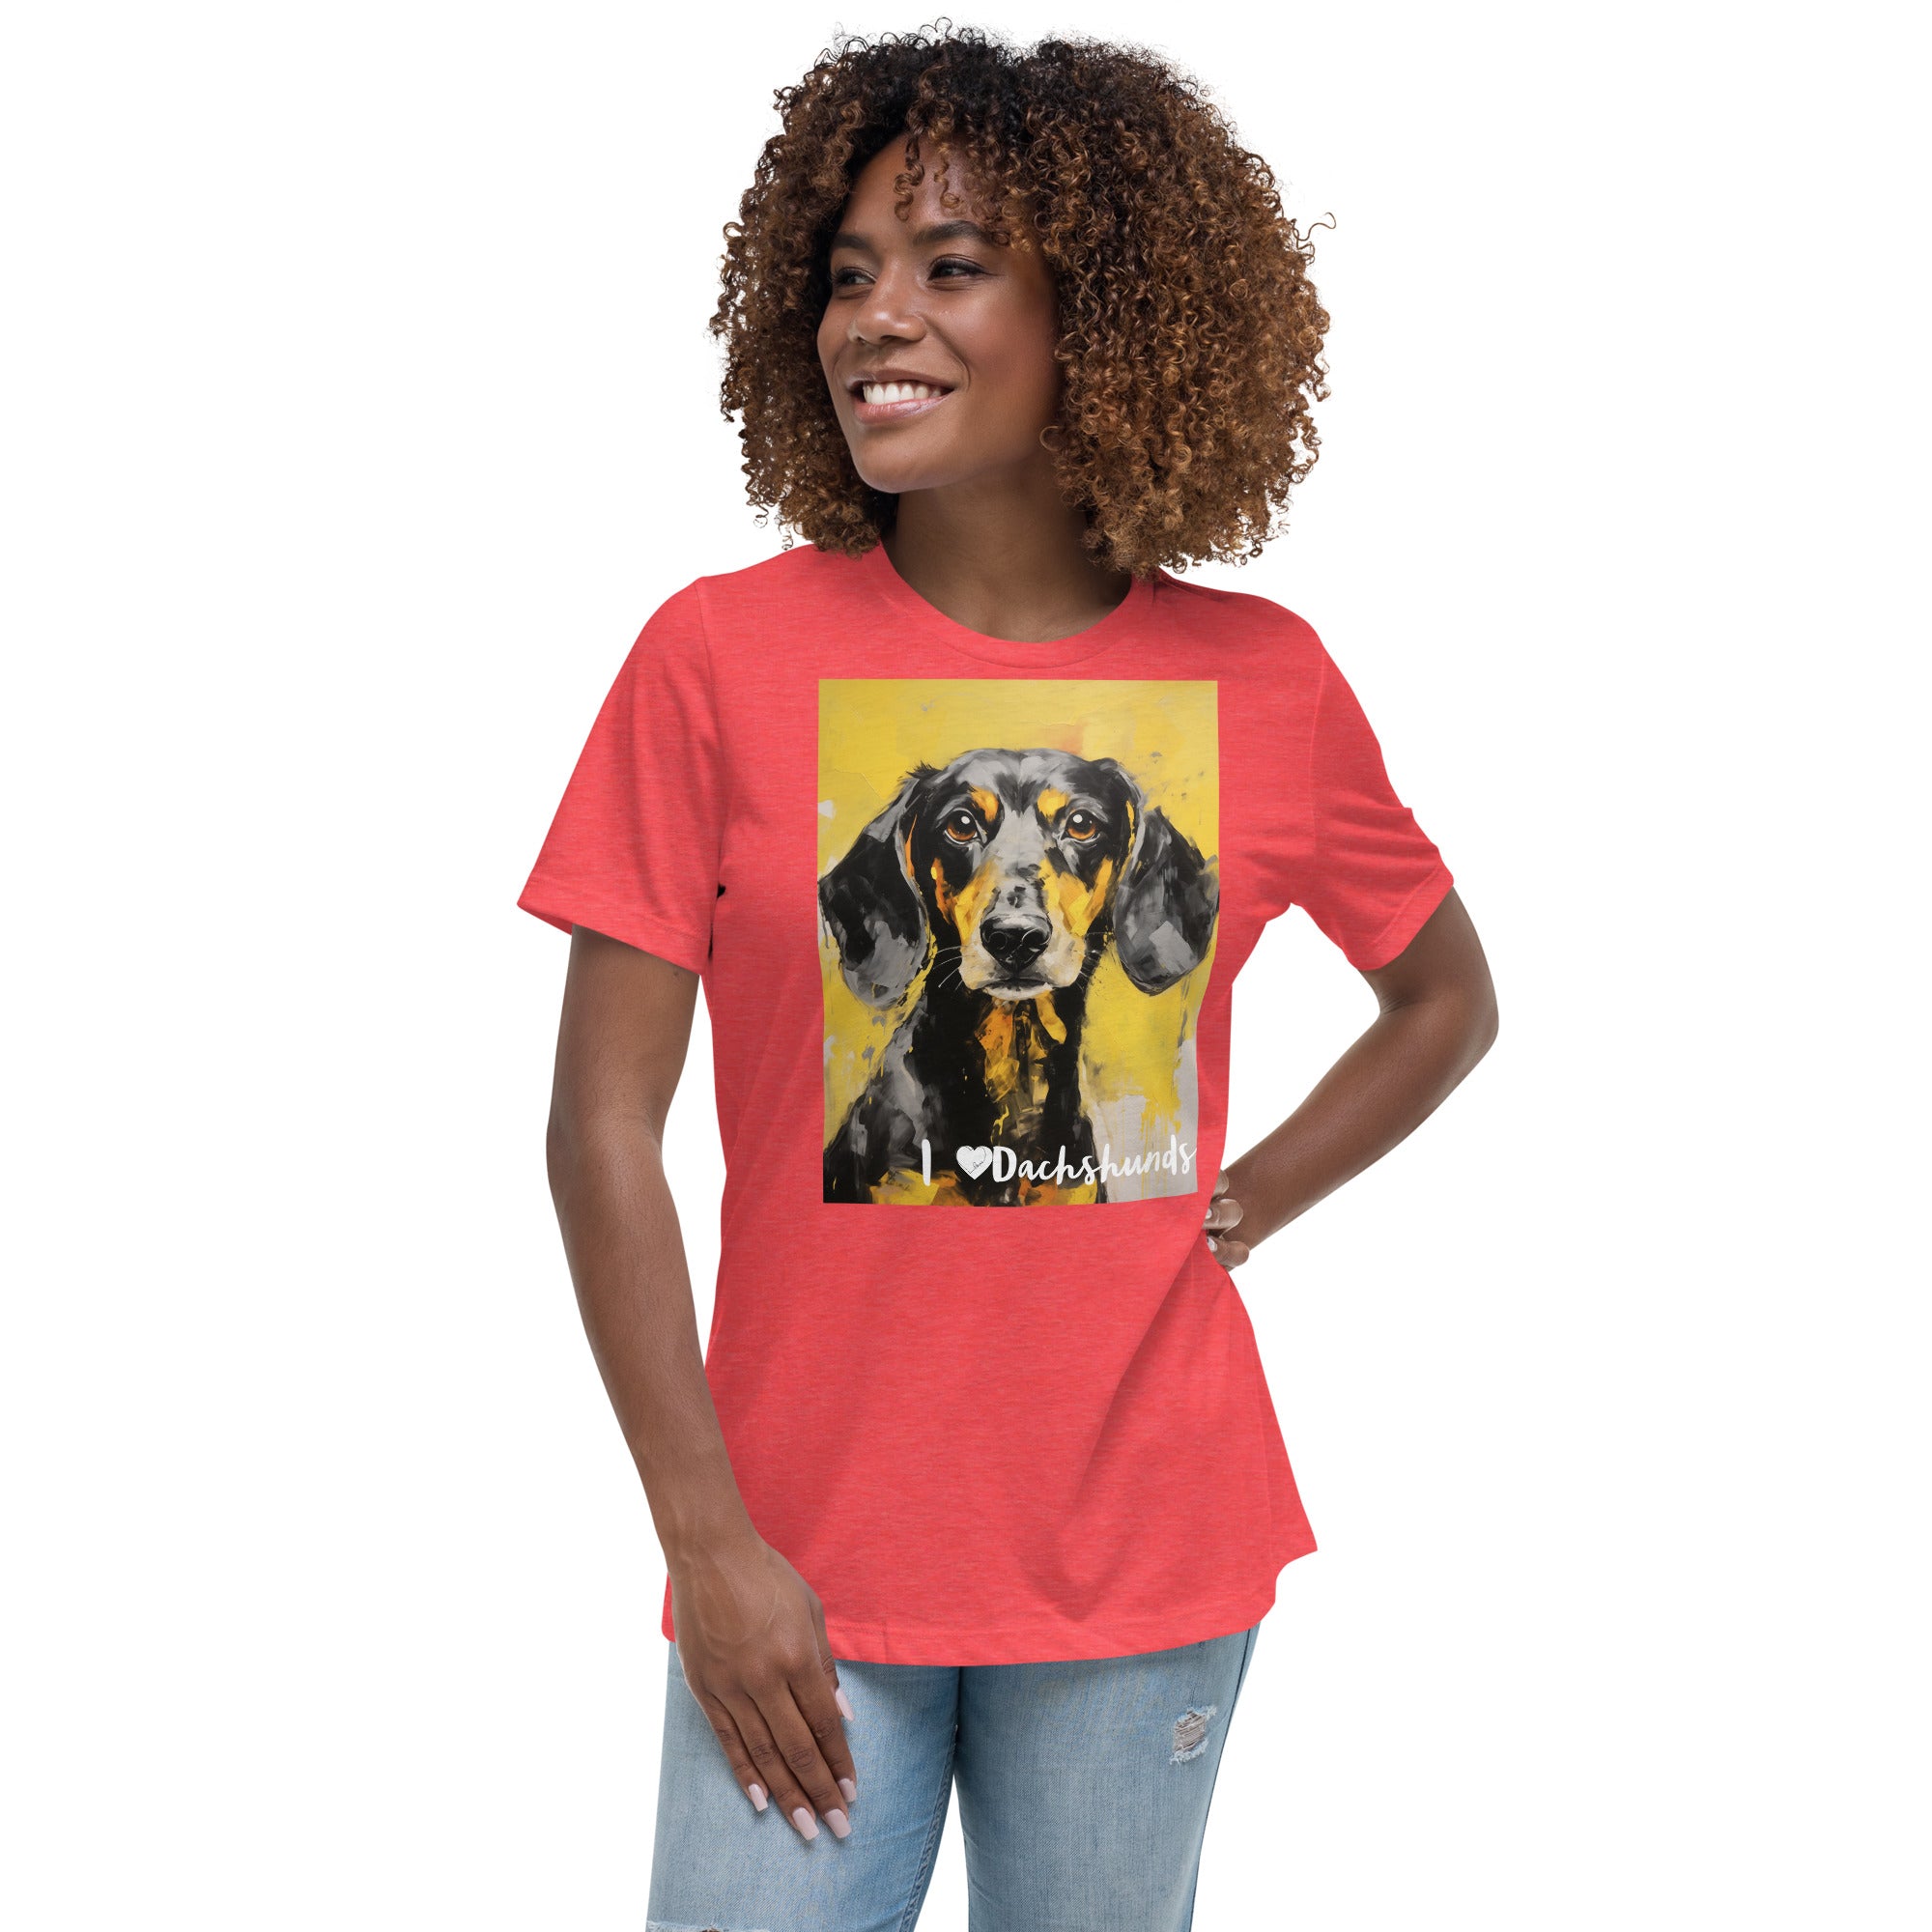 Women's Relaxed T-Shirt - I ❤ Dogs - Dachshund